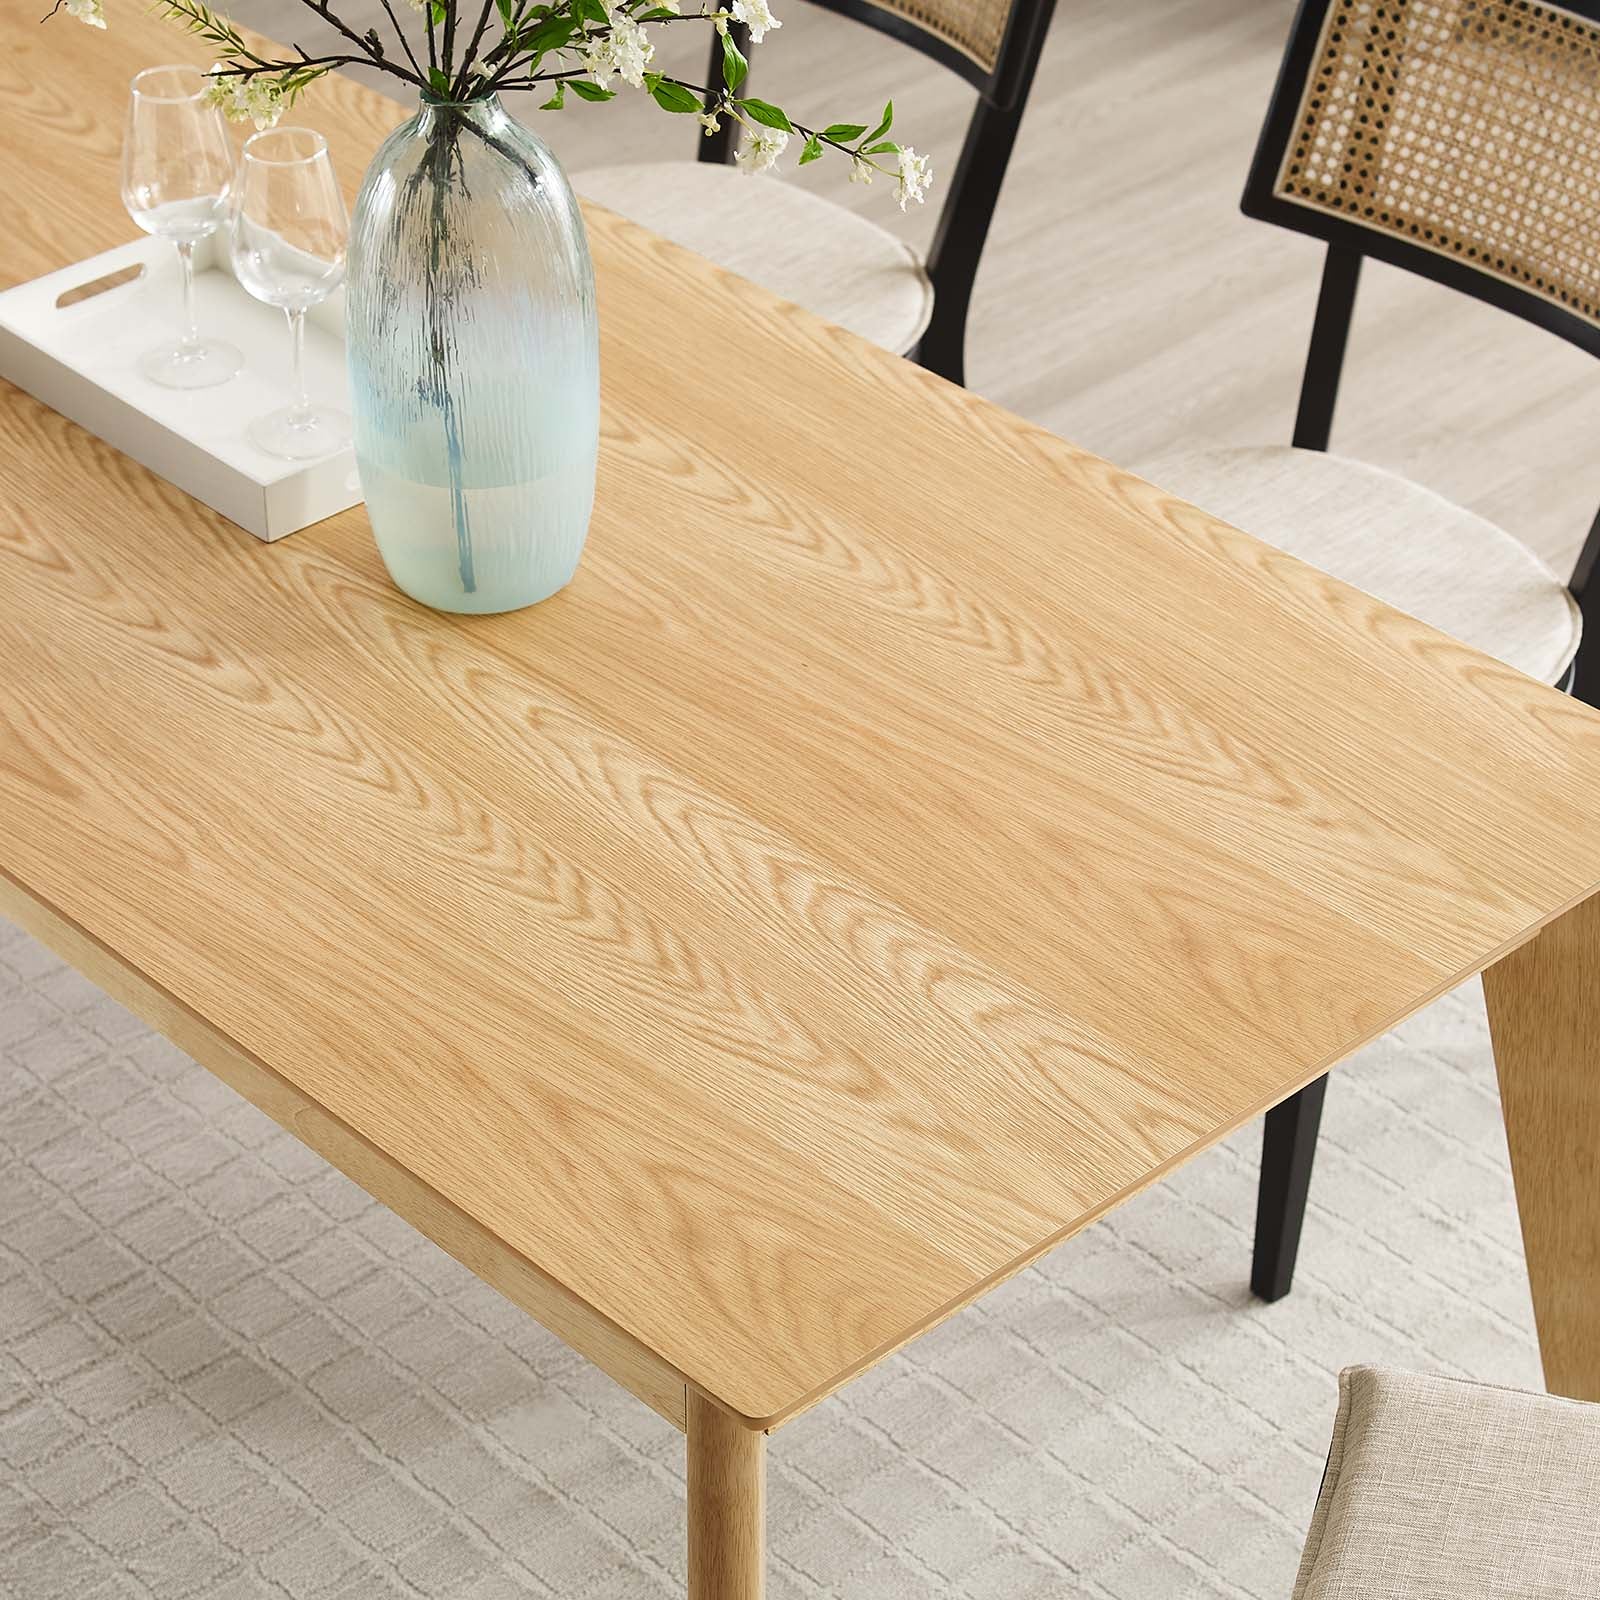 Oracle 69" Rectangle Dining Table - East Shore Modern Home Furnishings